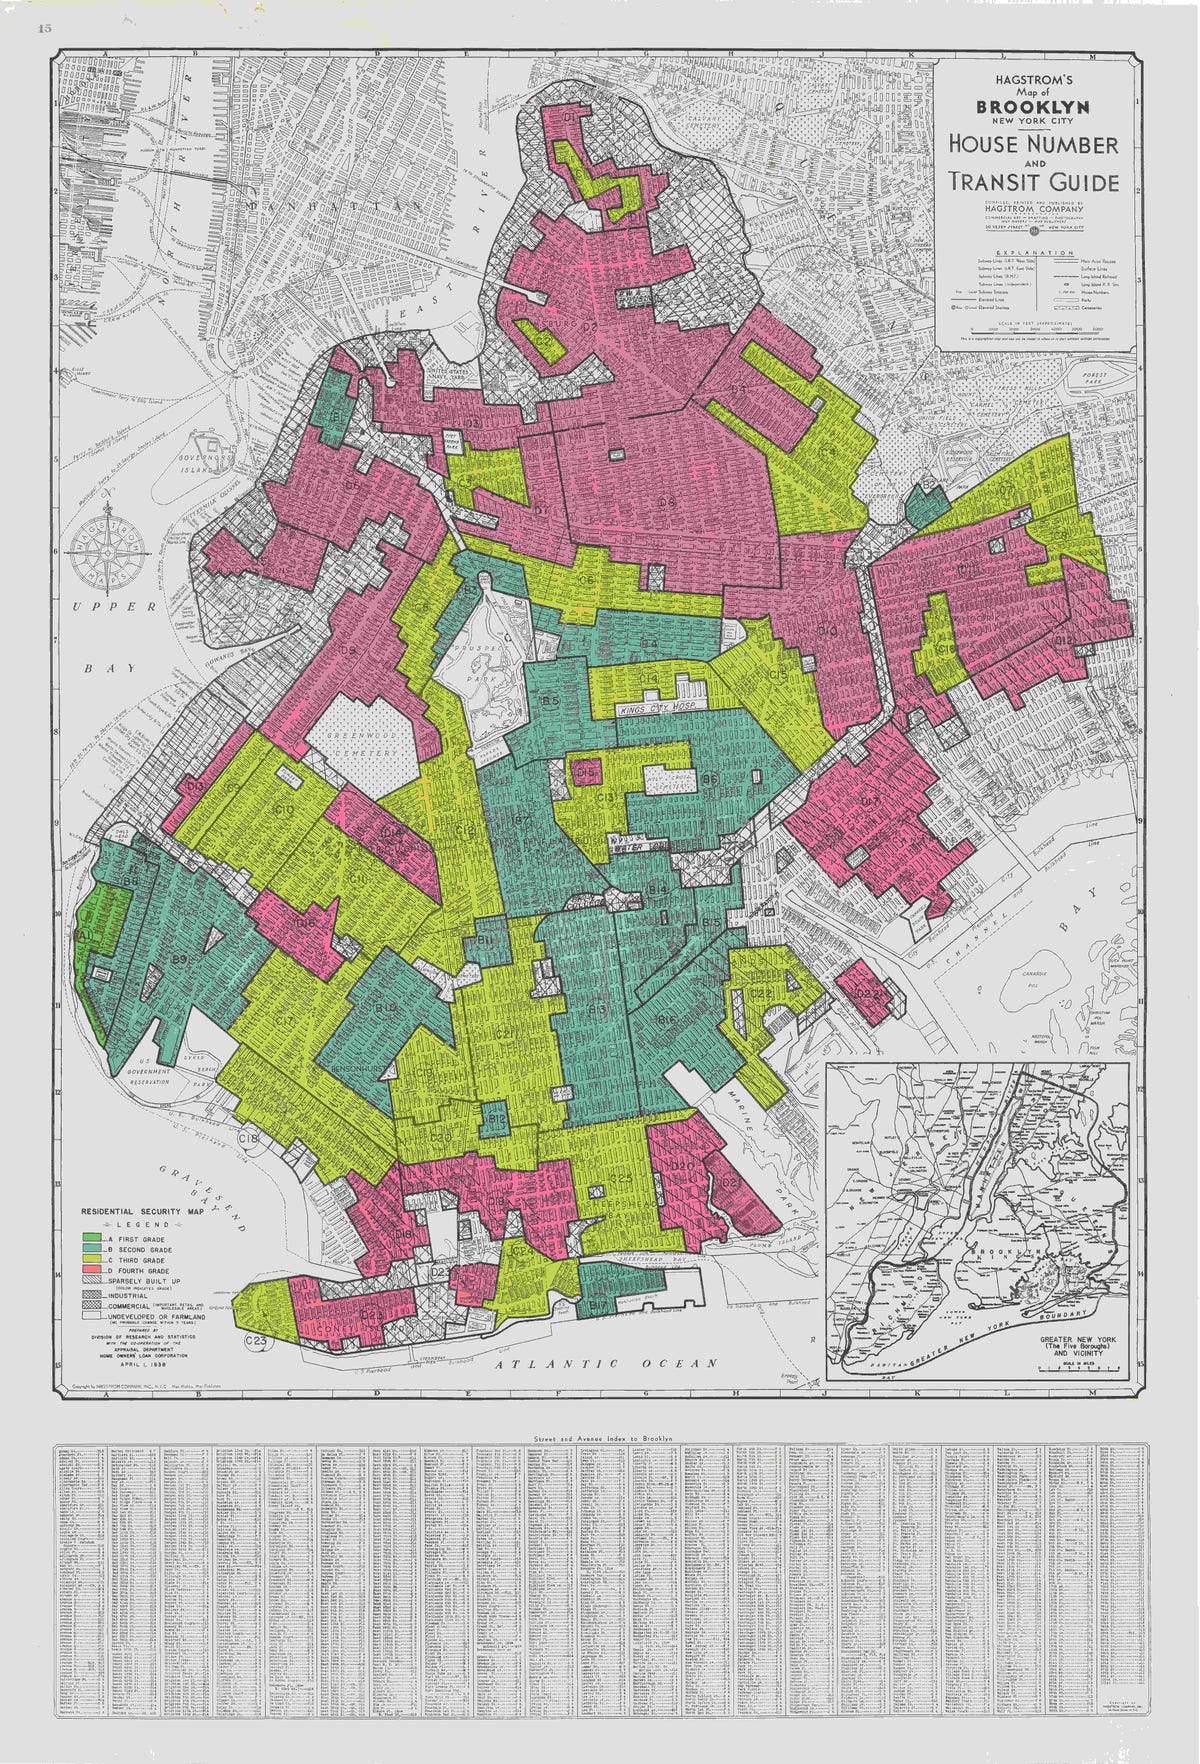 An image showing the New Deal's redline map of Brooklyn, New York. Various sections are highlighted in different colors.